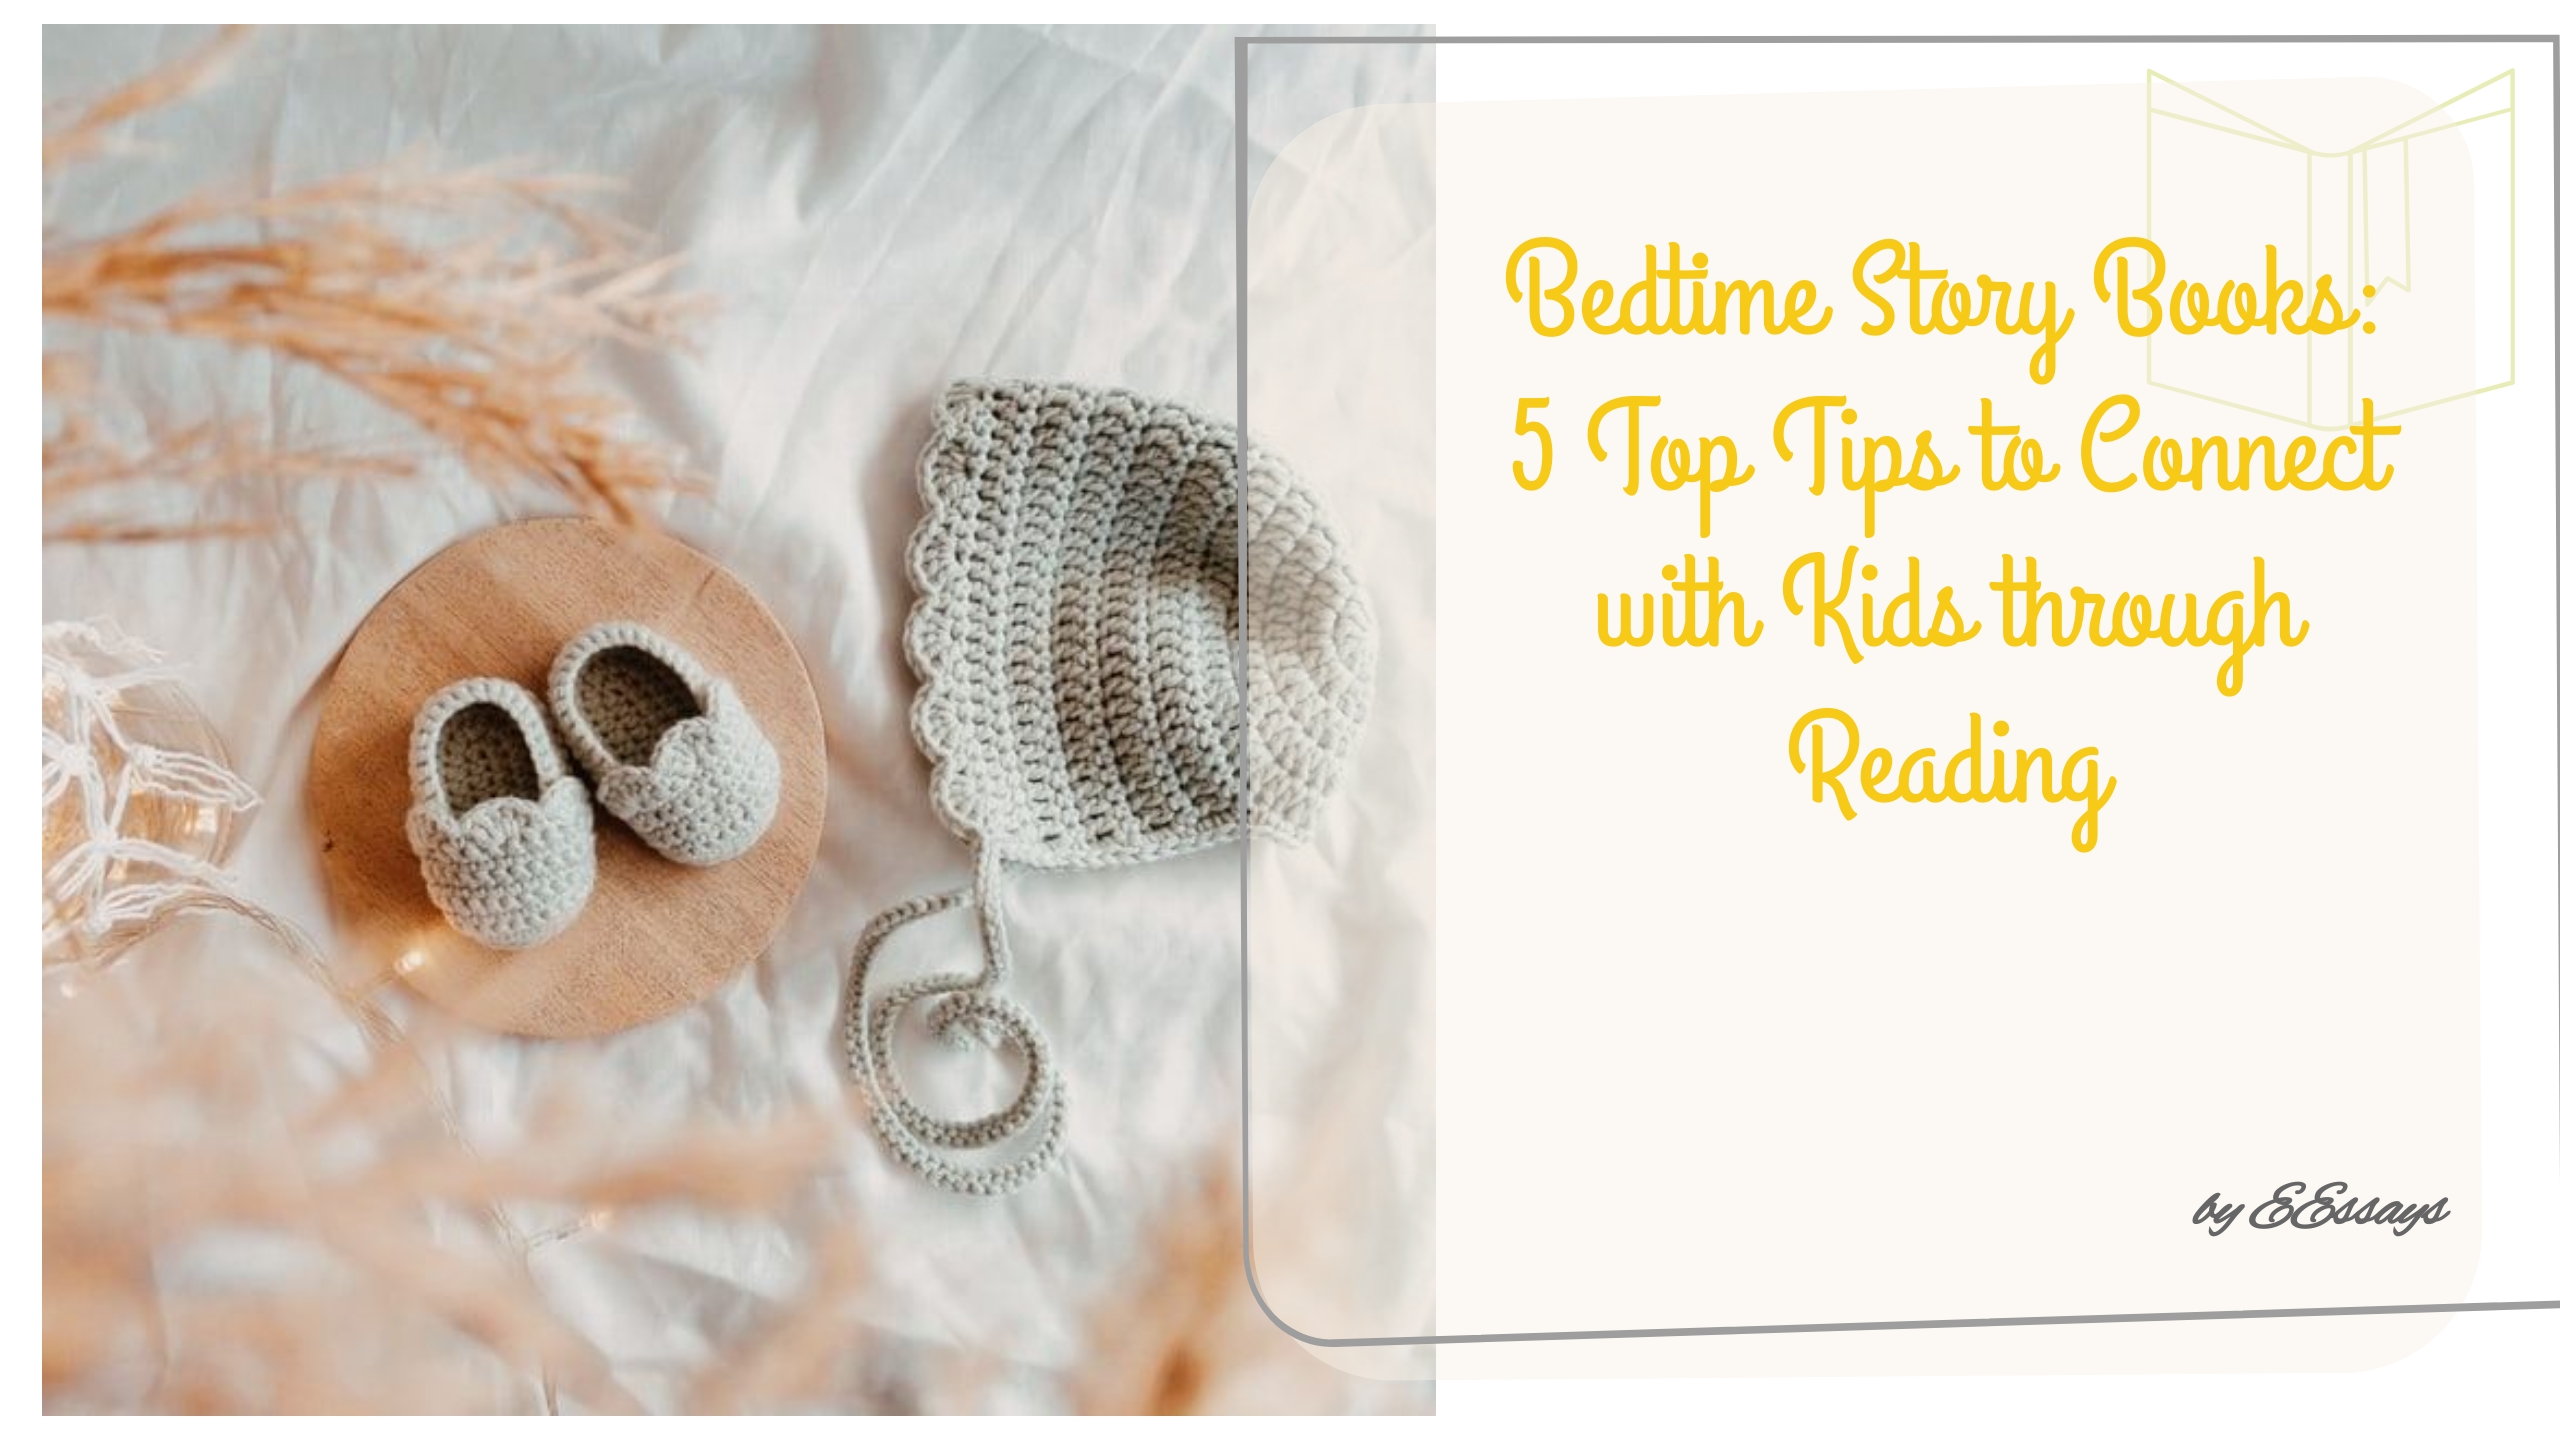 Bedtime Story Books: 5 Top Tips to Connect with Kids